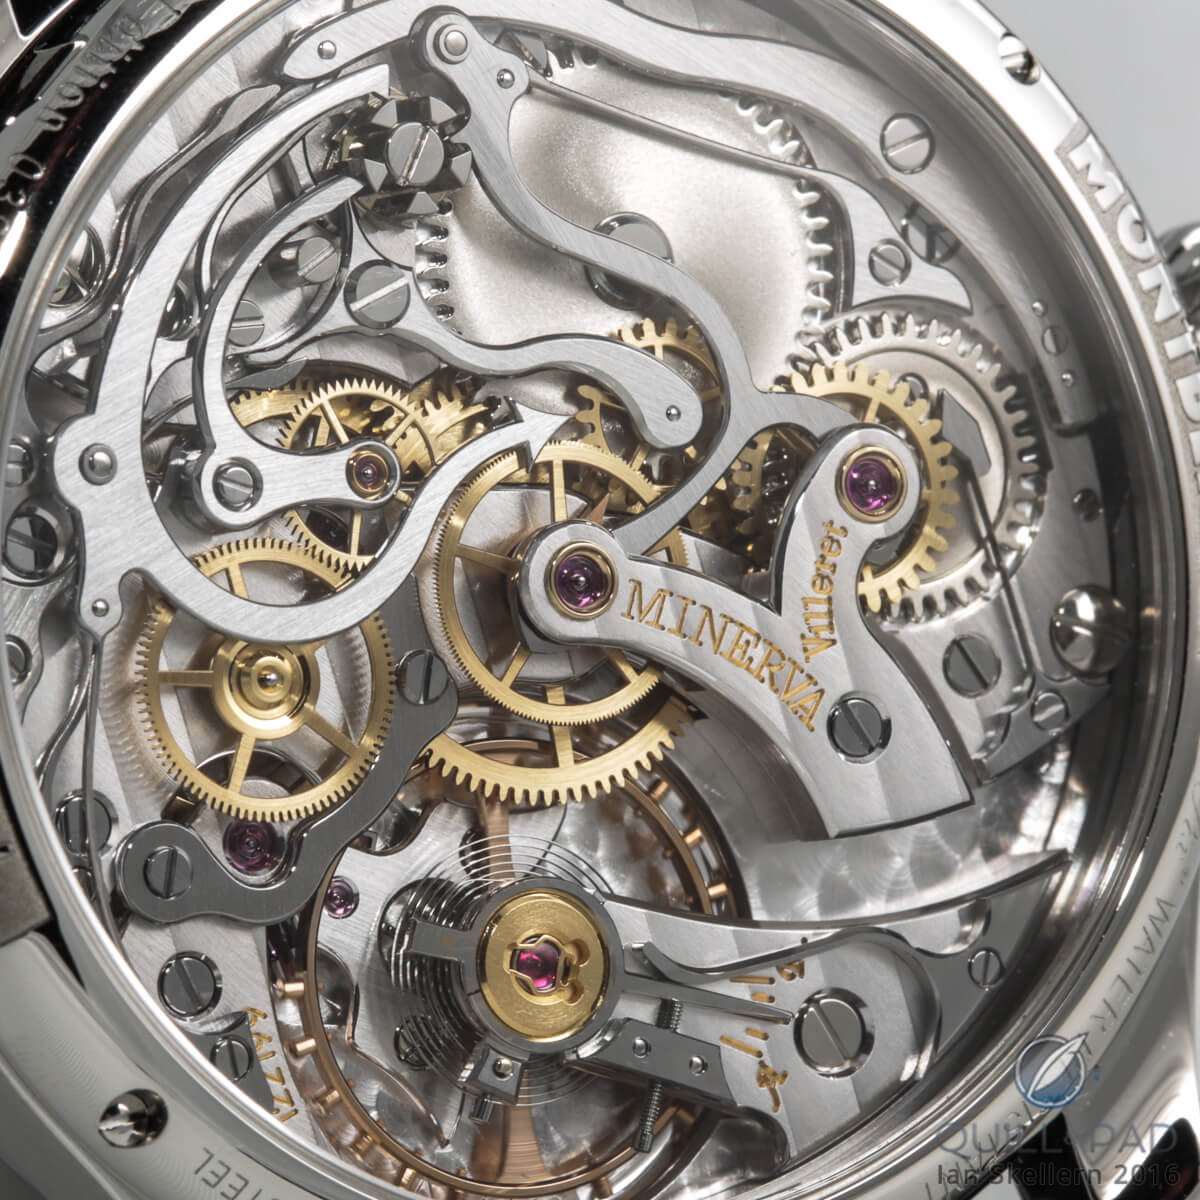 Close up look at the movement of the Montblanc 1858 Chronograph Tachymeter